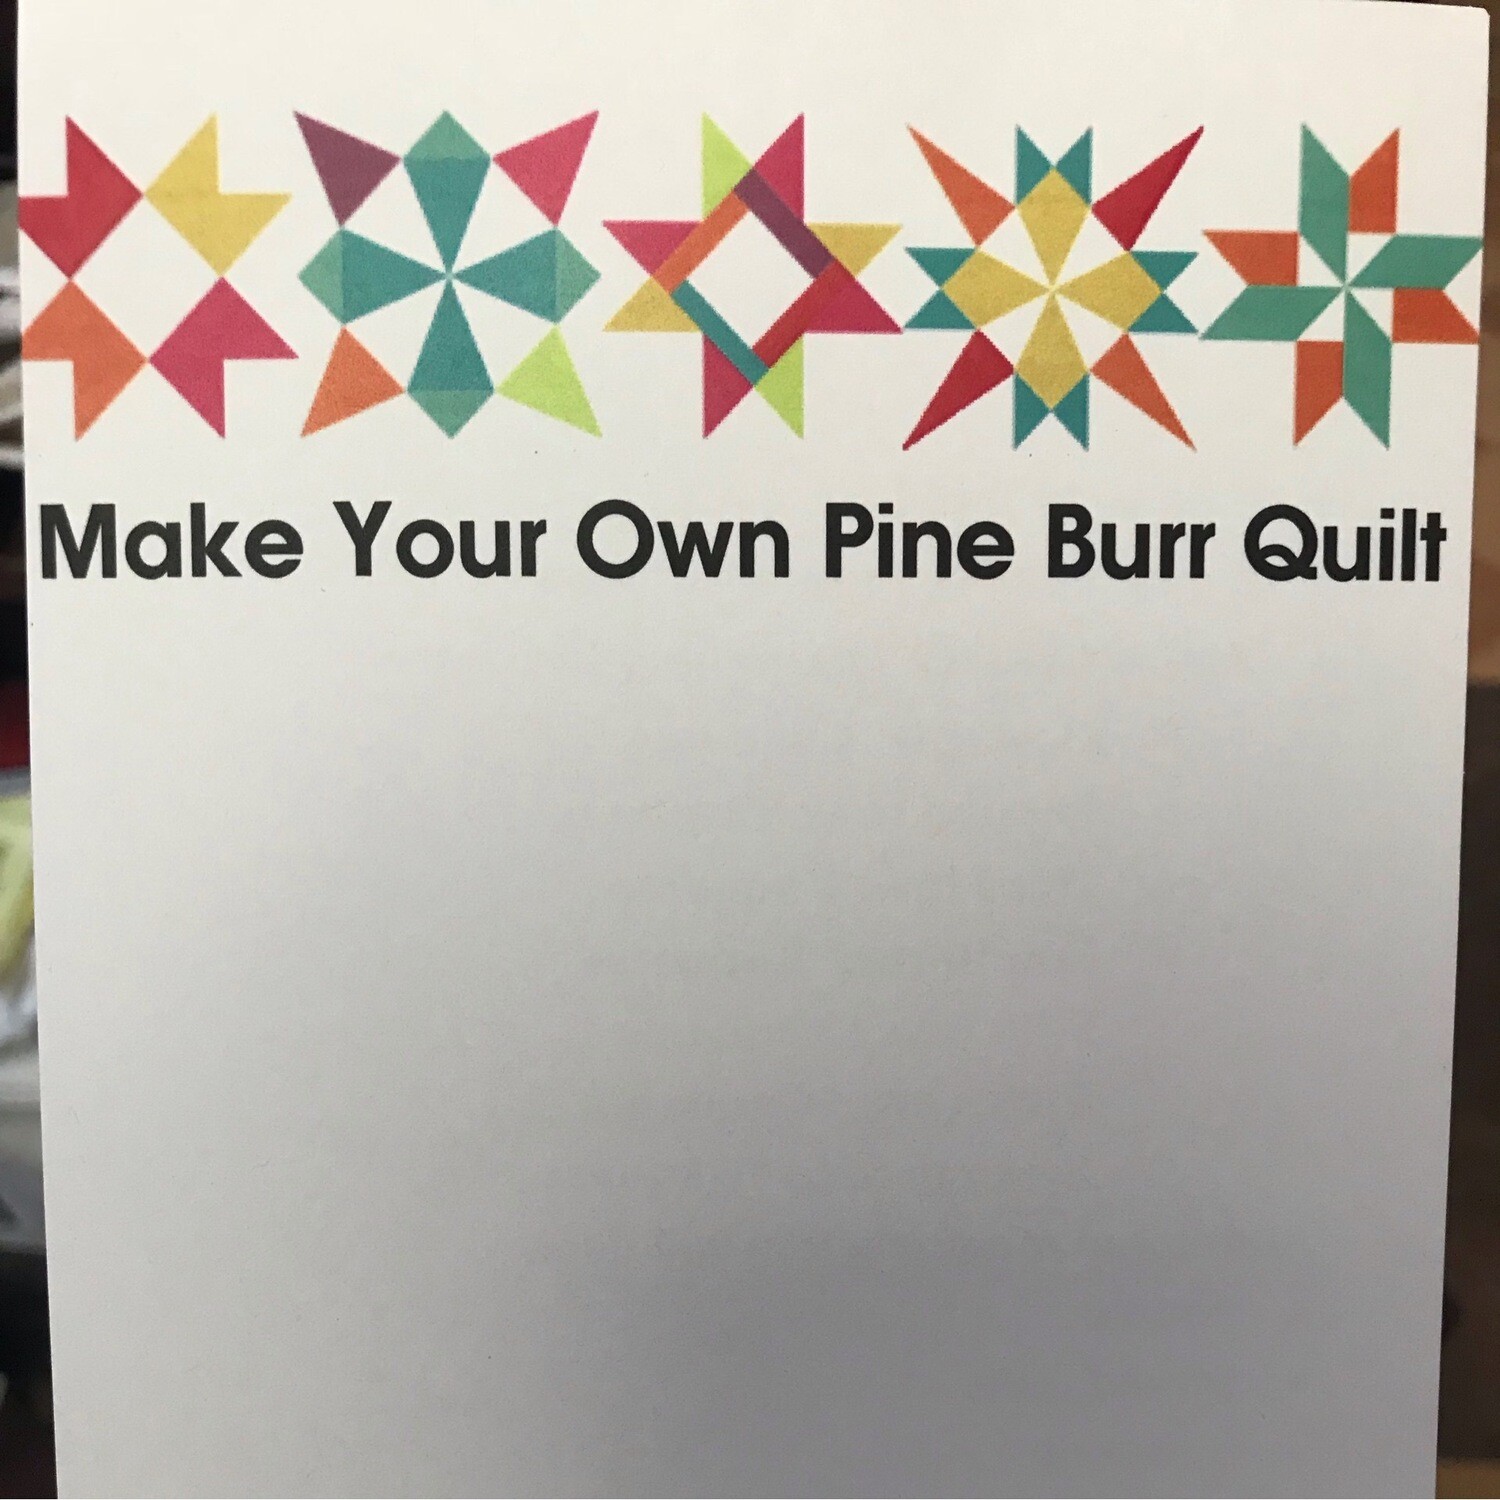 Make your own pine burr quilt